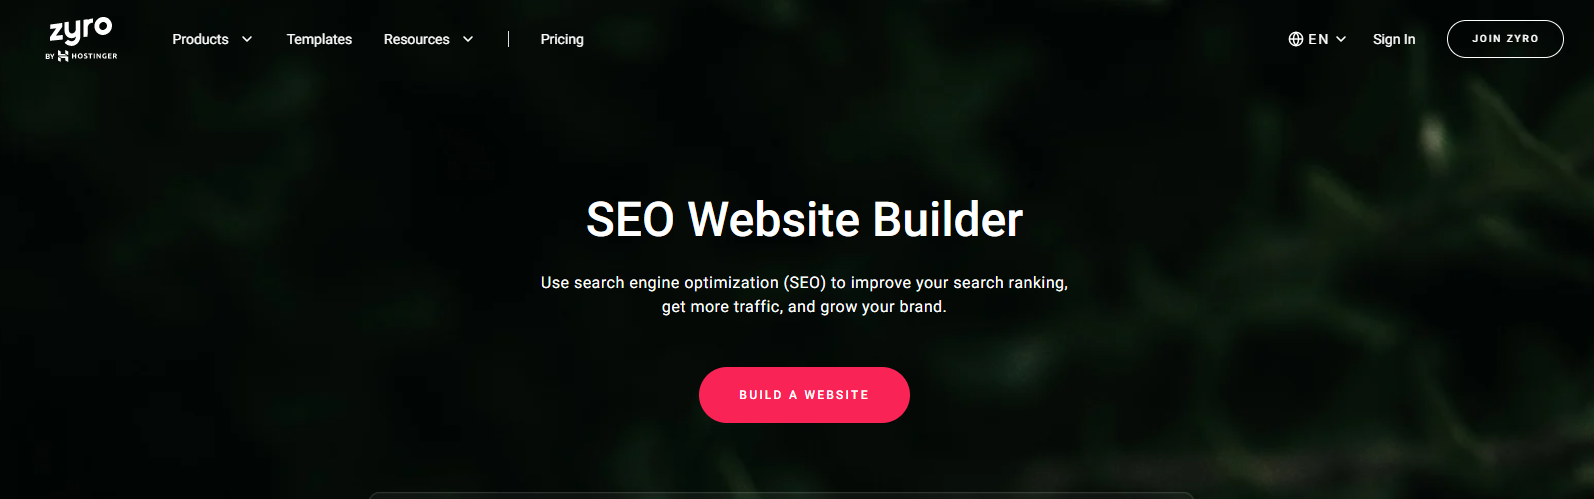 optimized with SEO tools